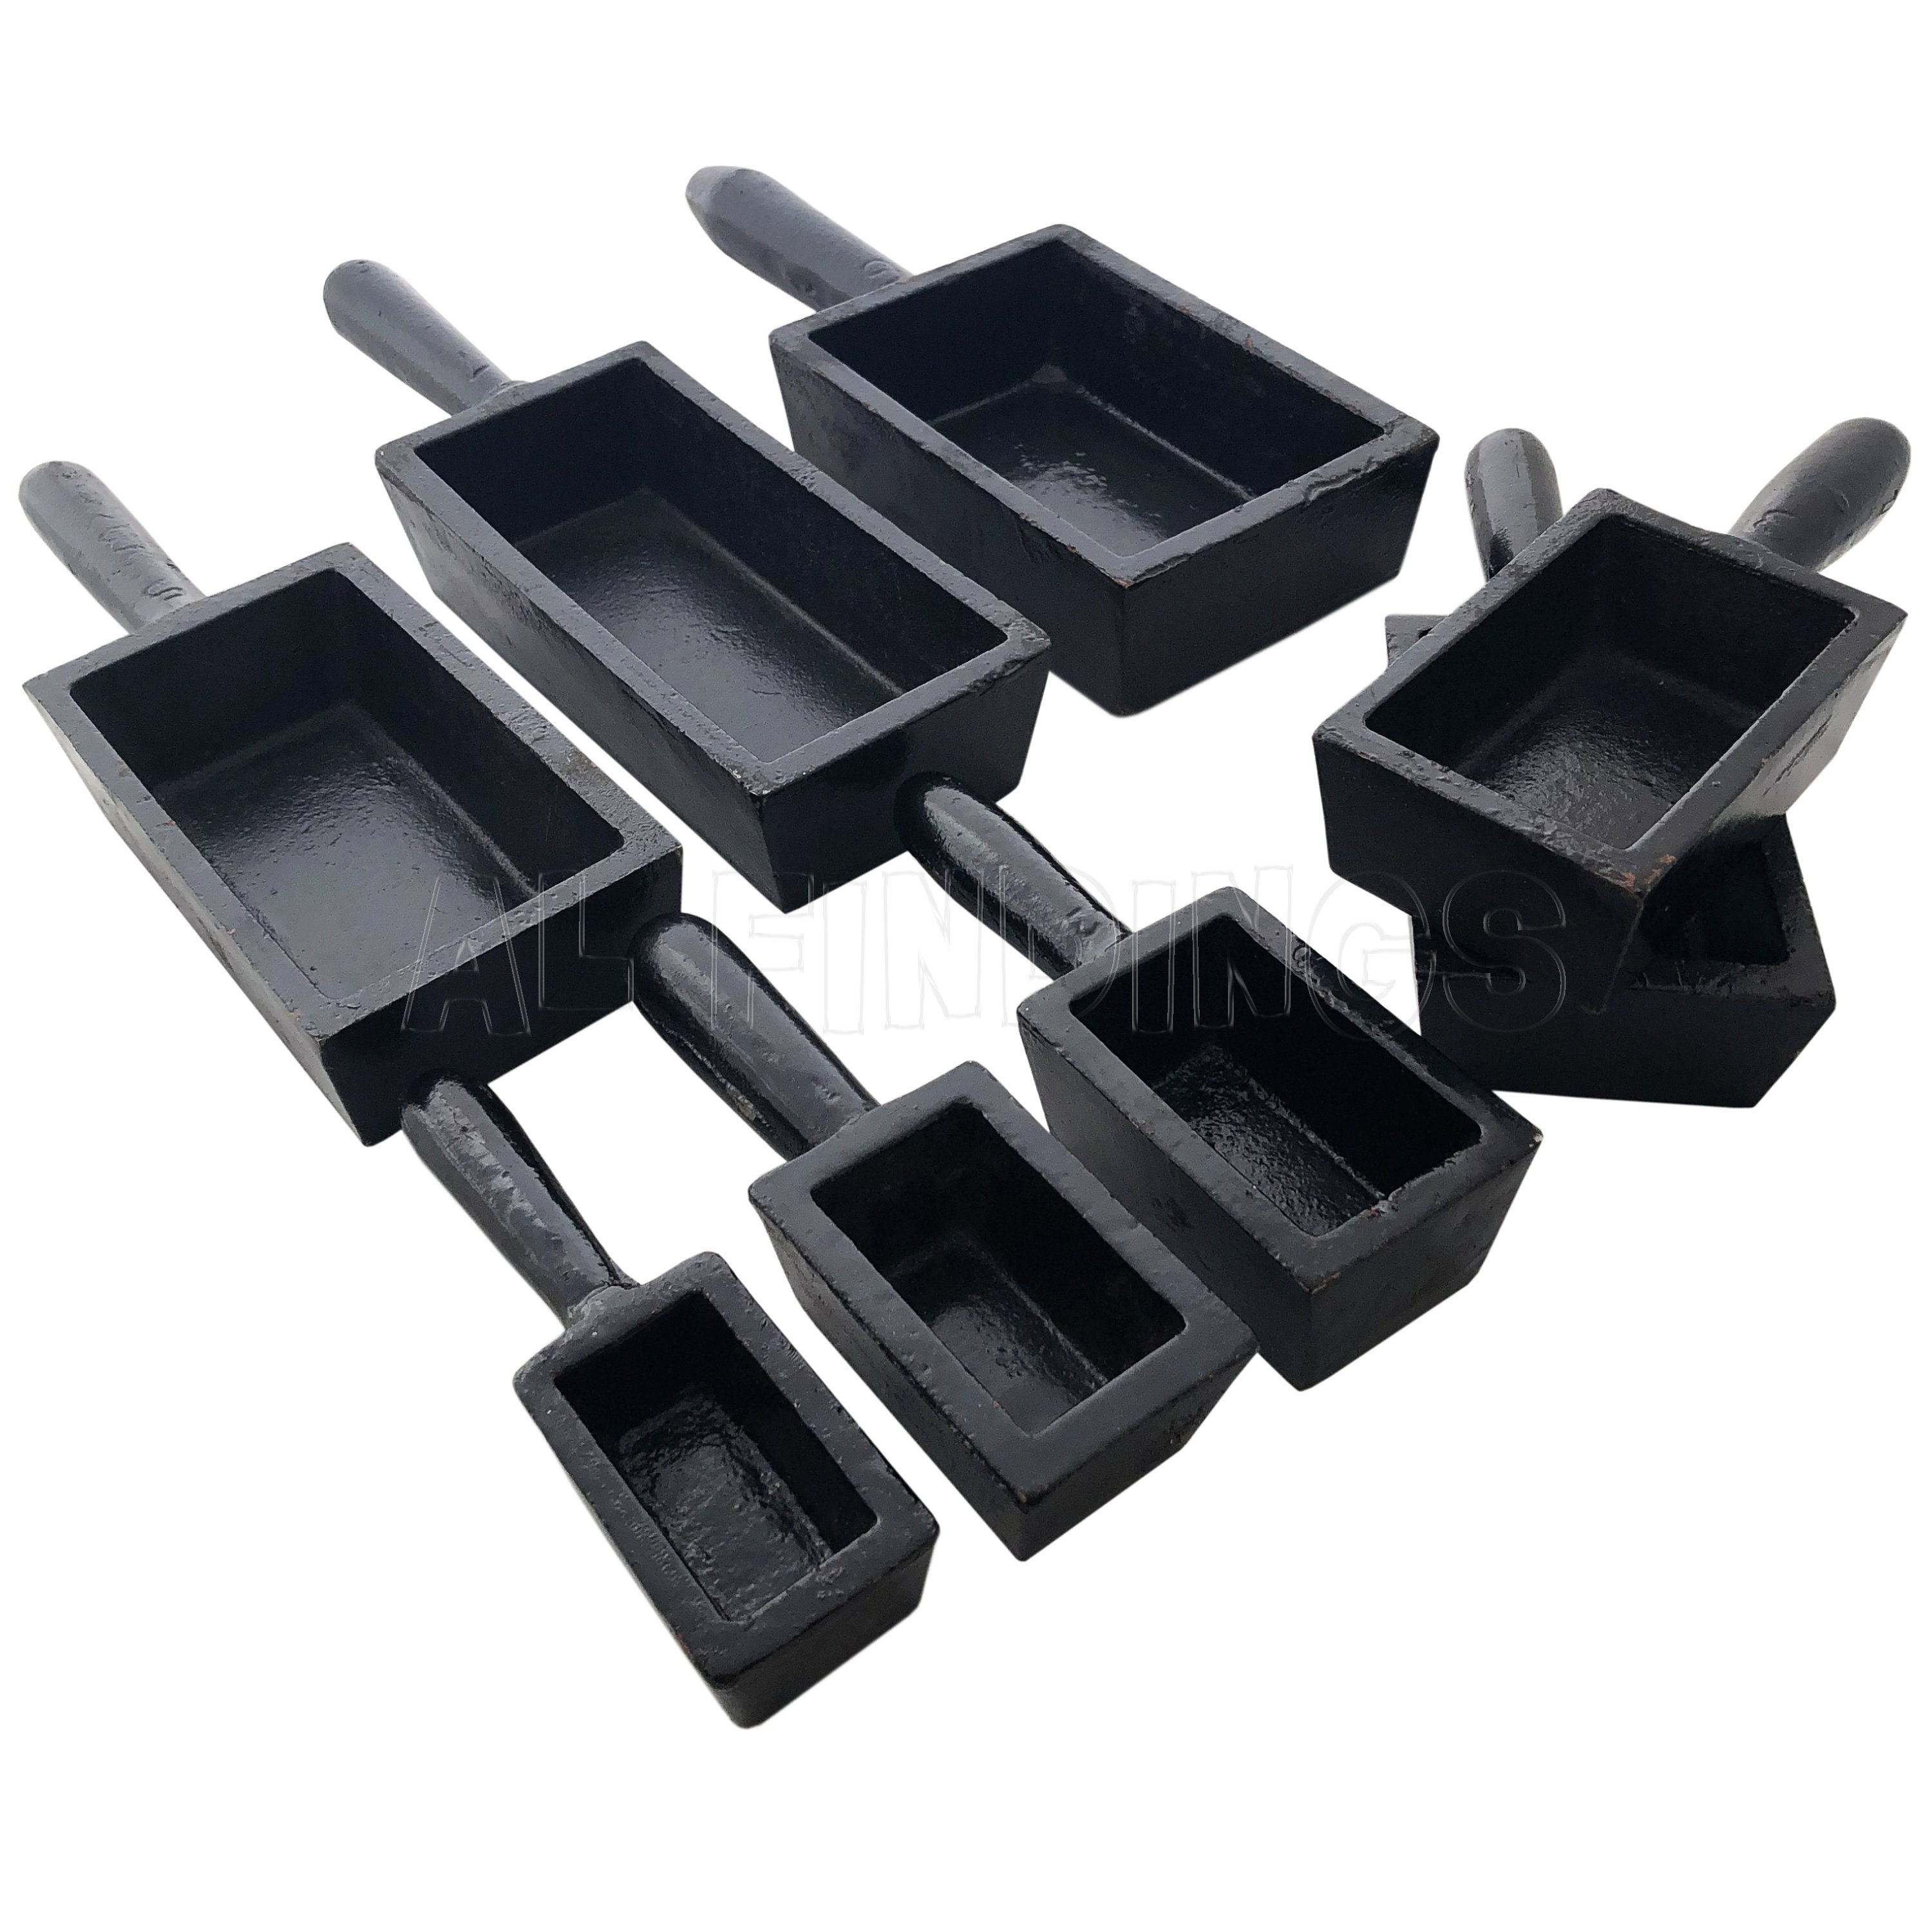 JEWEL TOOL 1 Kg Open Cast Ingot Mold Smelting of Non-Ferrous Metals Such as  Gold, Silver, Copper, Aluminum 